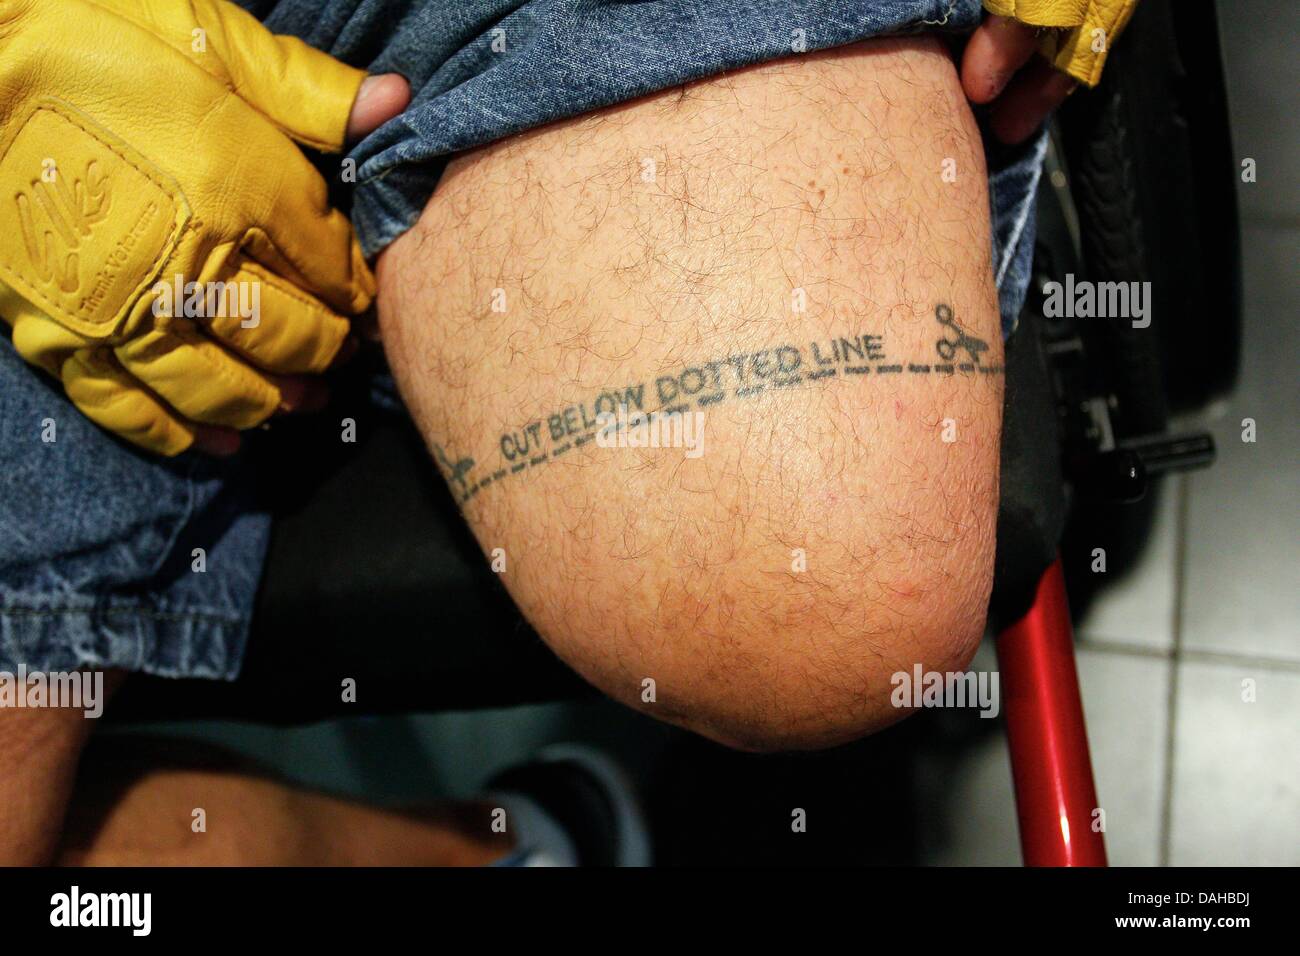 Tampa, Florida, USA. 13th July, 2013. DANIEL WALLACE | Times.Dave Nelson, 50, a Navy veteran from Nebraska, shows his sense of humor with a tattoo above his amputated knee before opening ceremonies for the 33rd National Veterans Wheelchair Games at the Tampa Bay Times Forum on Saturday, July 13, 2013. Nelson lost his lower leg after two amputations due to a staph infection. This is his sixth games, this year he is competing in the hand cycle race, bowling, shot put, discus and nine ball events. Credit:  Daniel Wallace/Tampa Bay Times/ZUMAPRESS.com/Alamy Live News Stock Photo